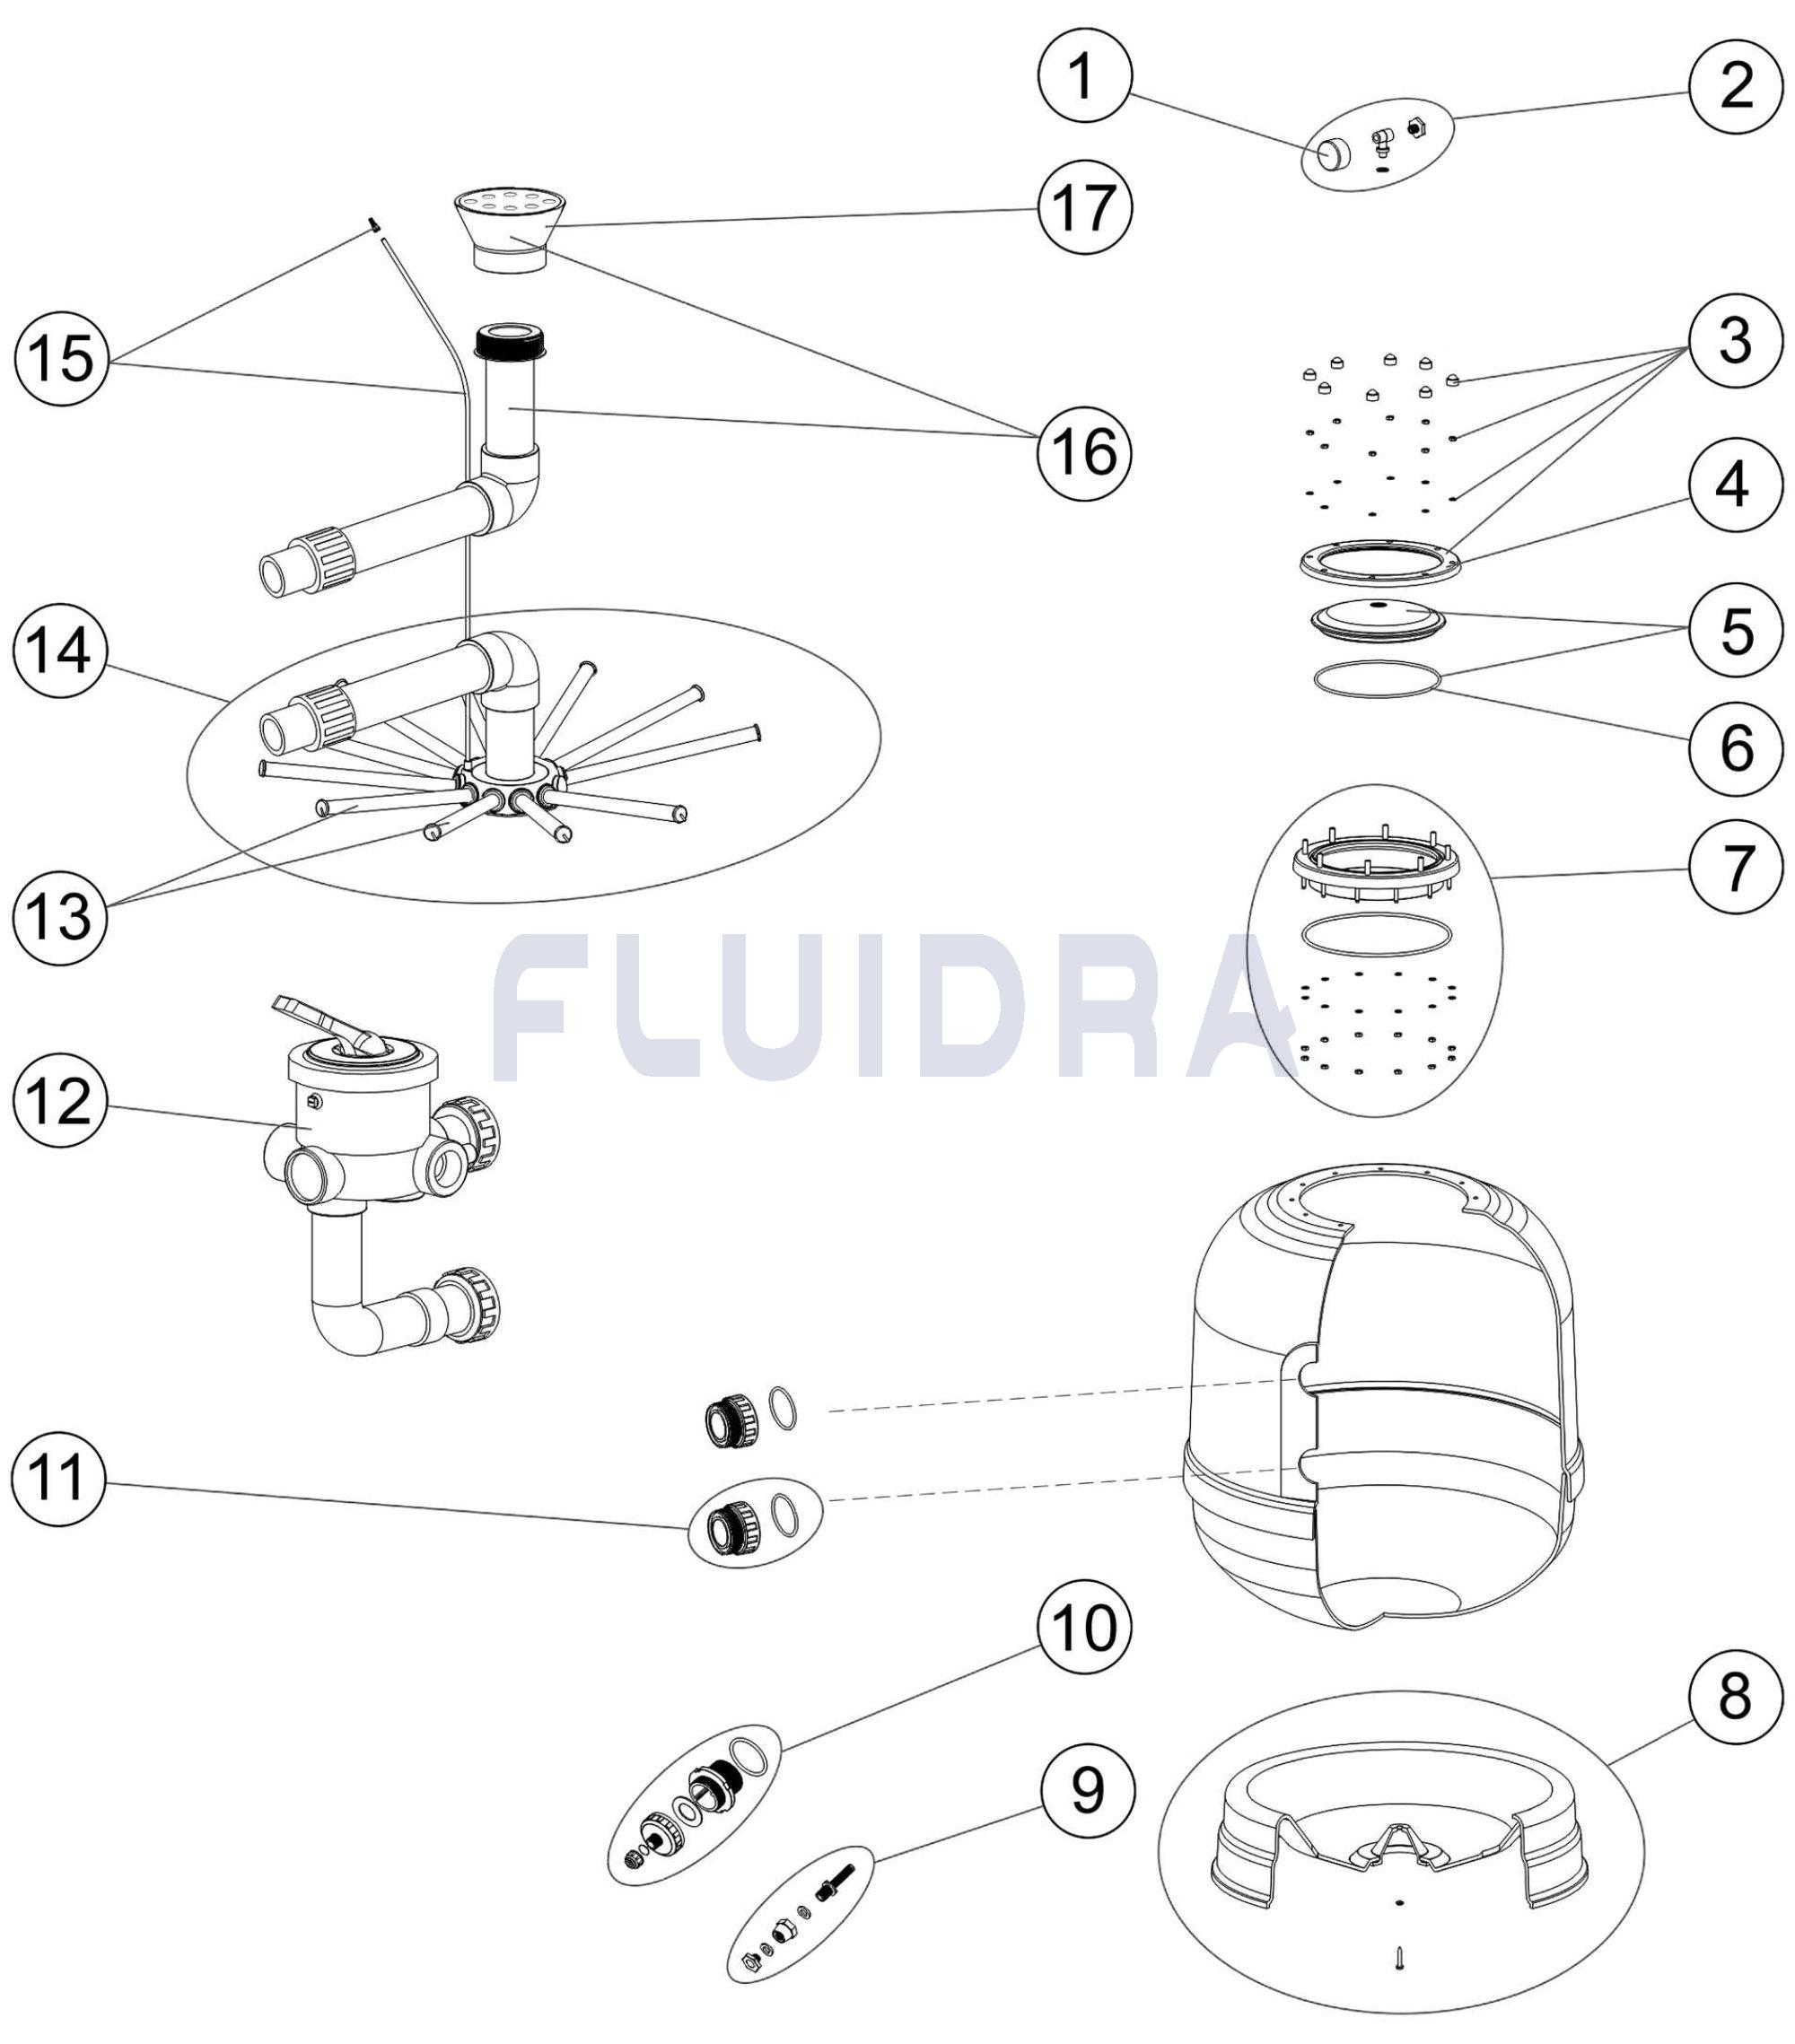 https://spareparts.astralpool.com/en/exploded-view.php?producto=WF000097